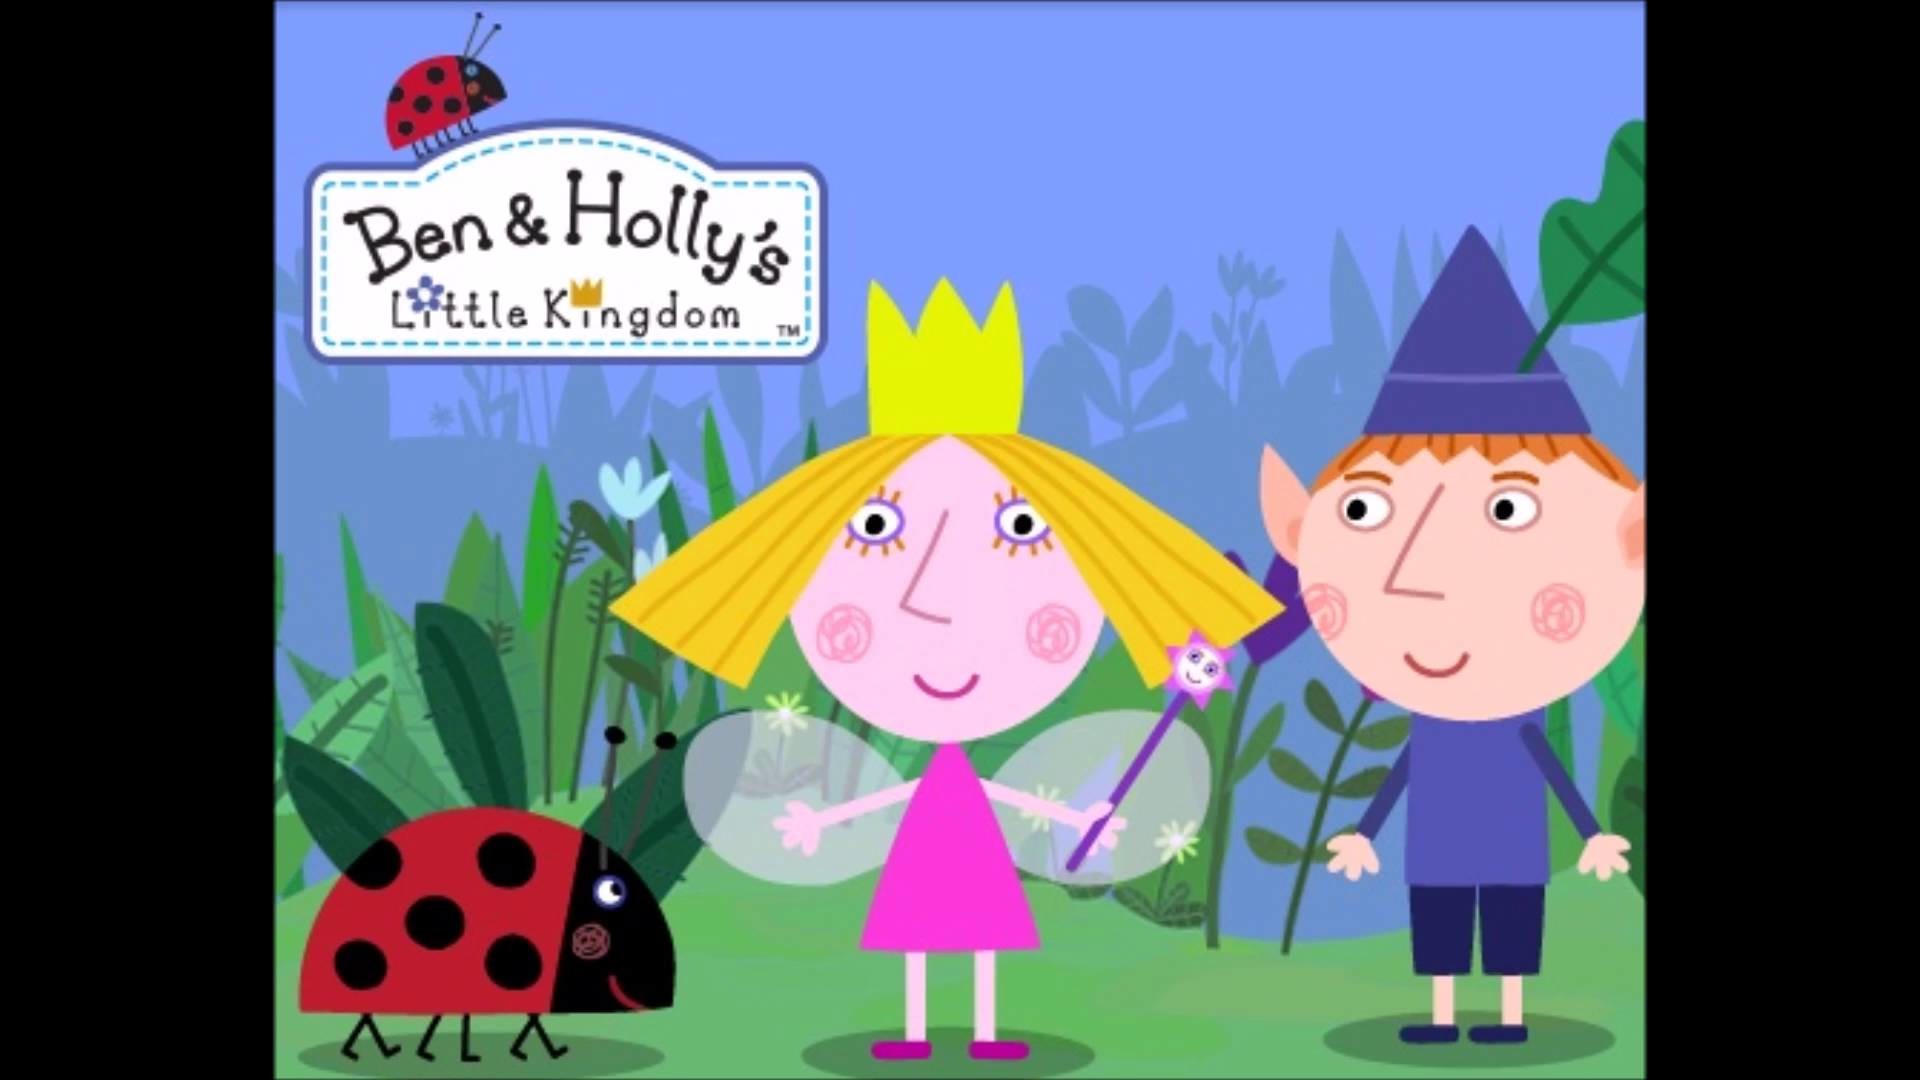 1920x1080 Ben & Holly's Little Kingdom Theme Song